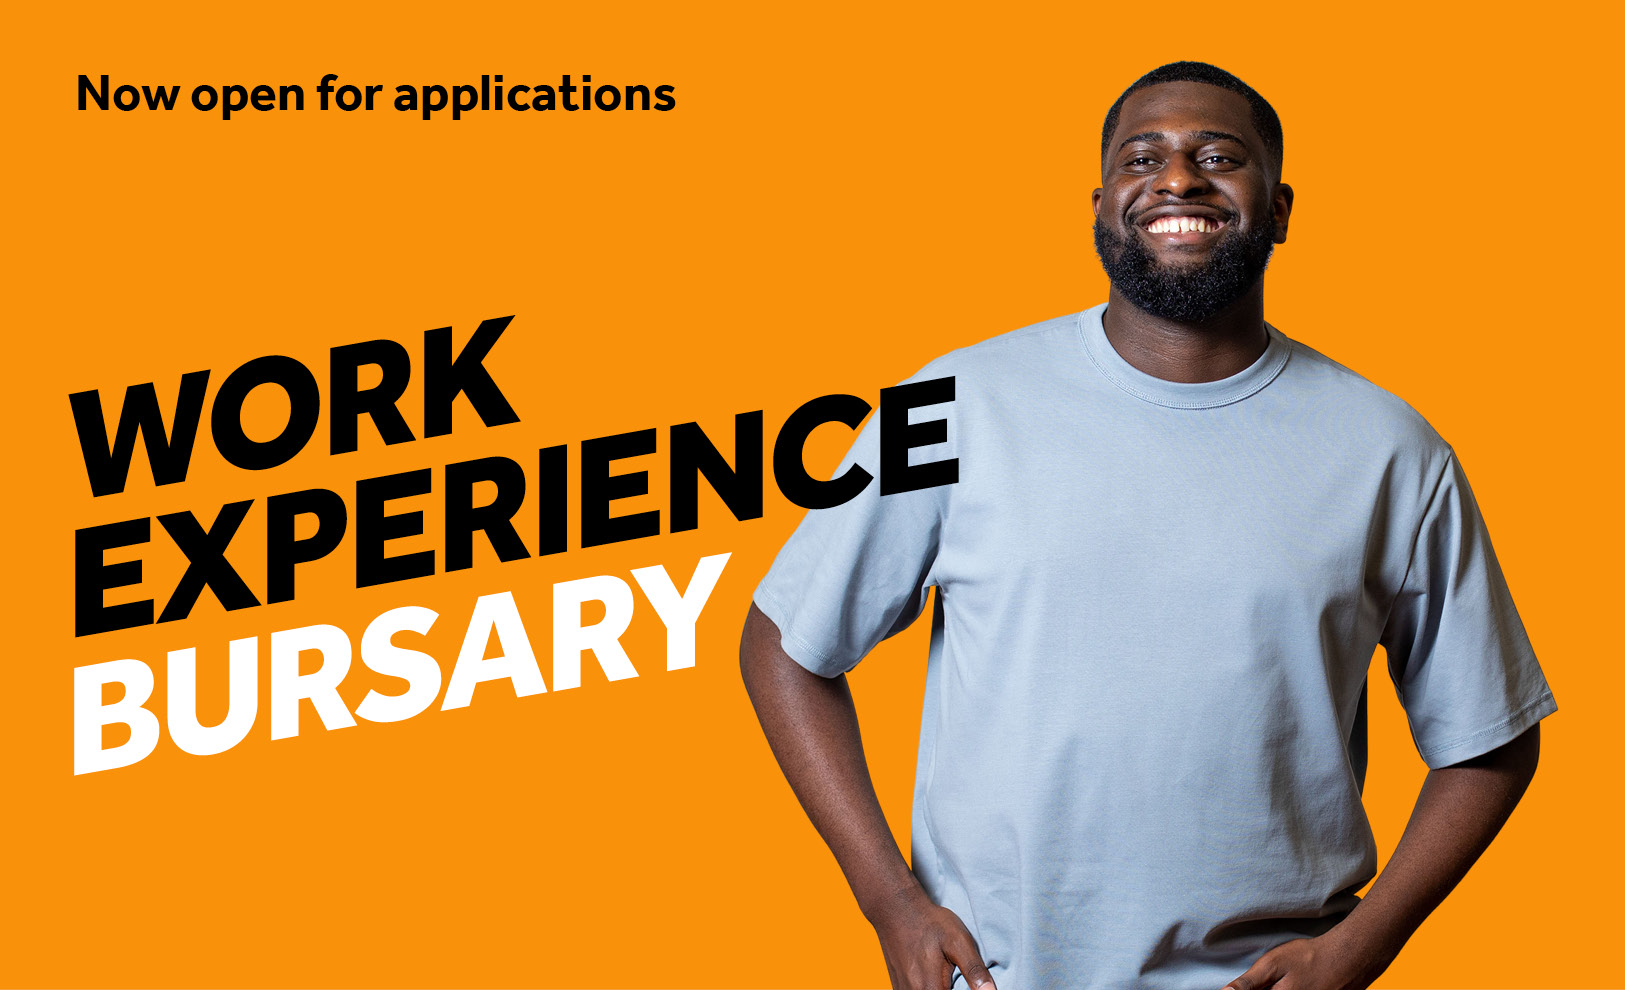 Orange background with an image of a smiling student. Text reads: Work Experience Bursary / Now open for applications